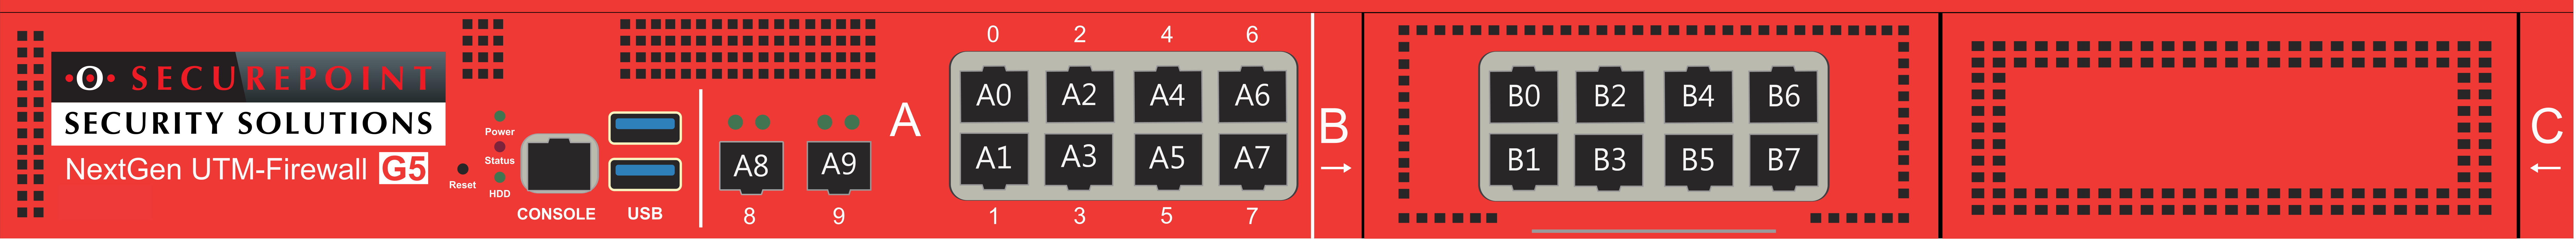 Datei:RC 350-1000 Slot A+B.png